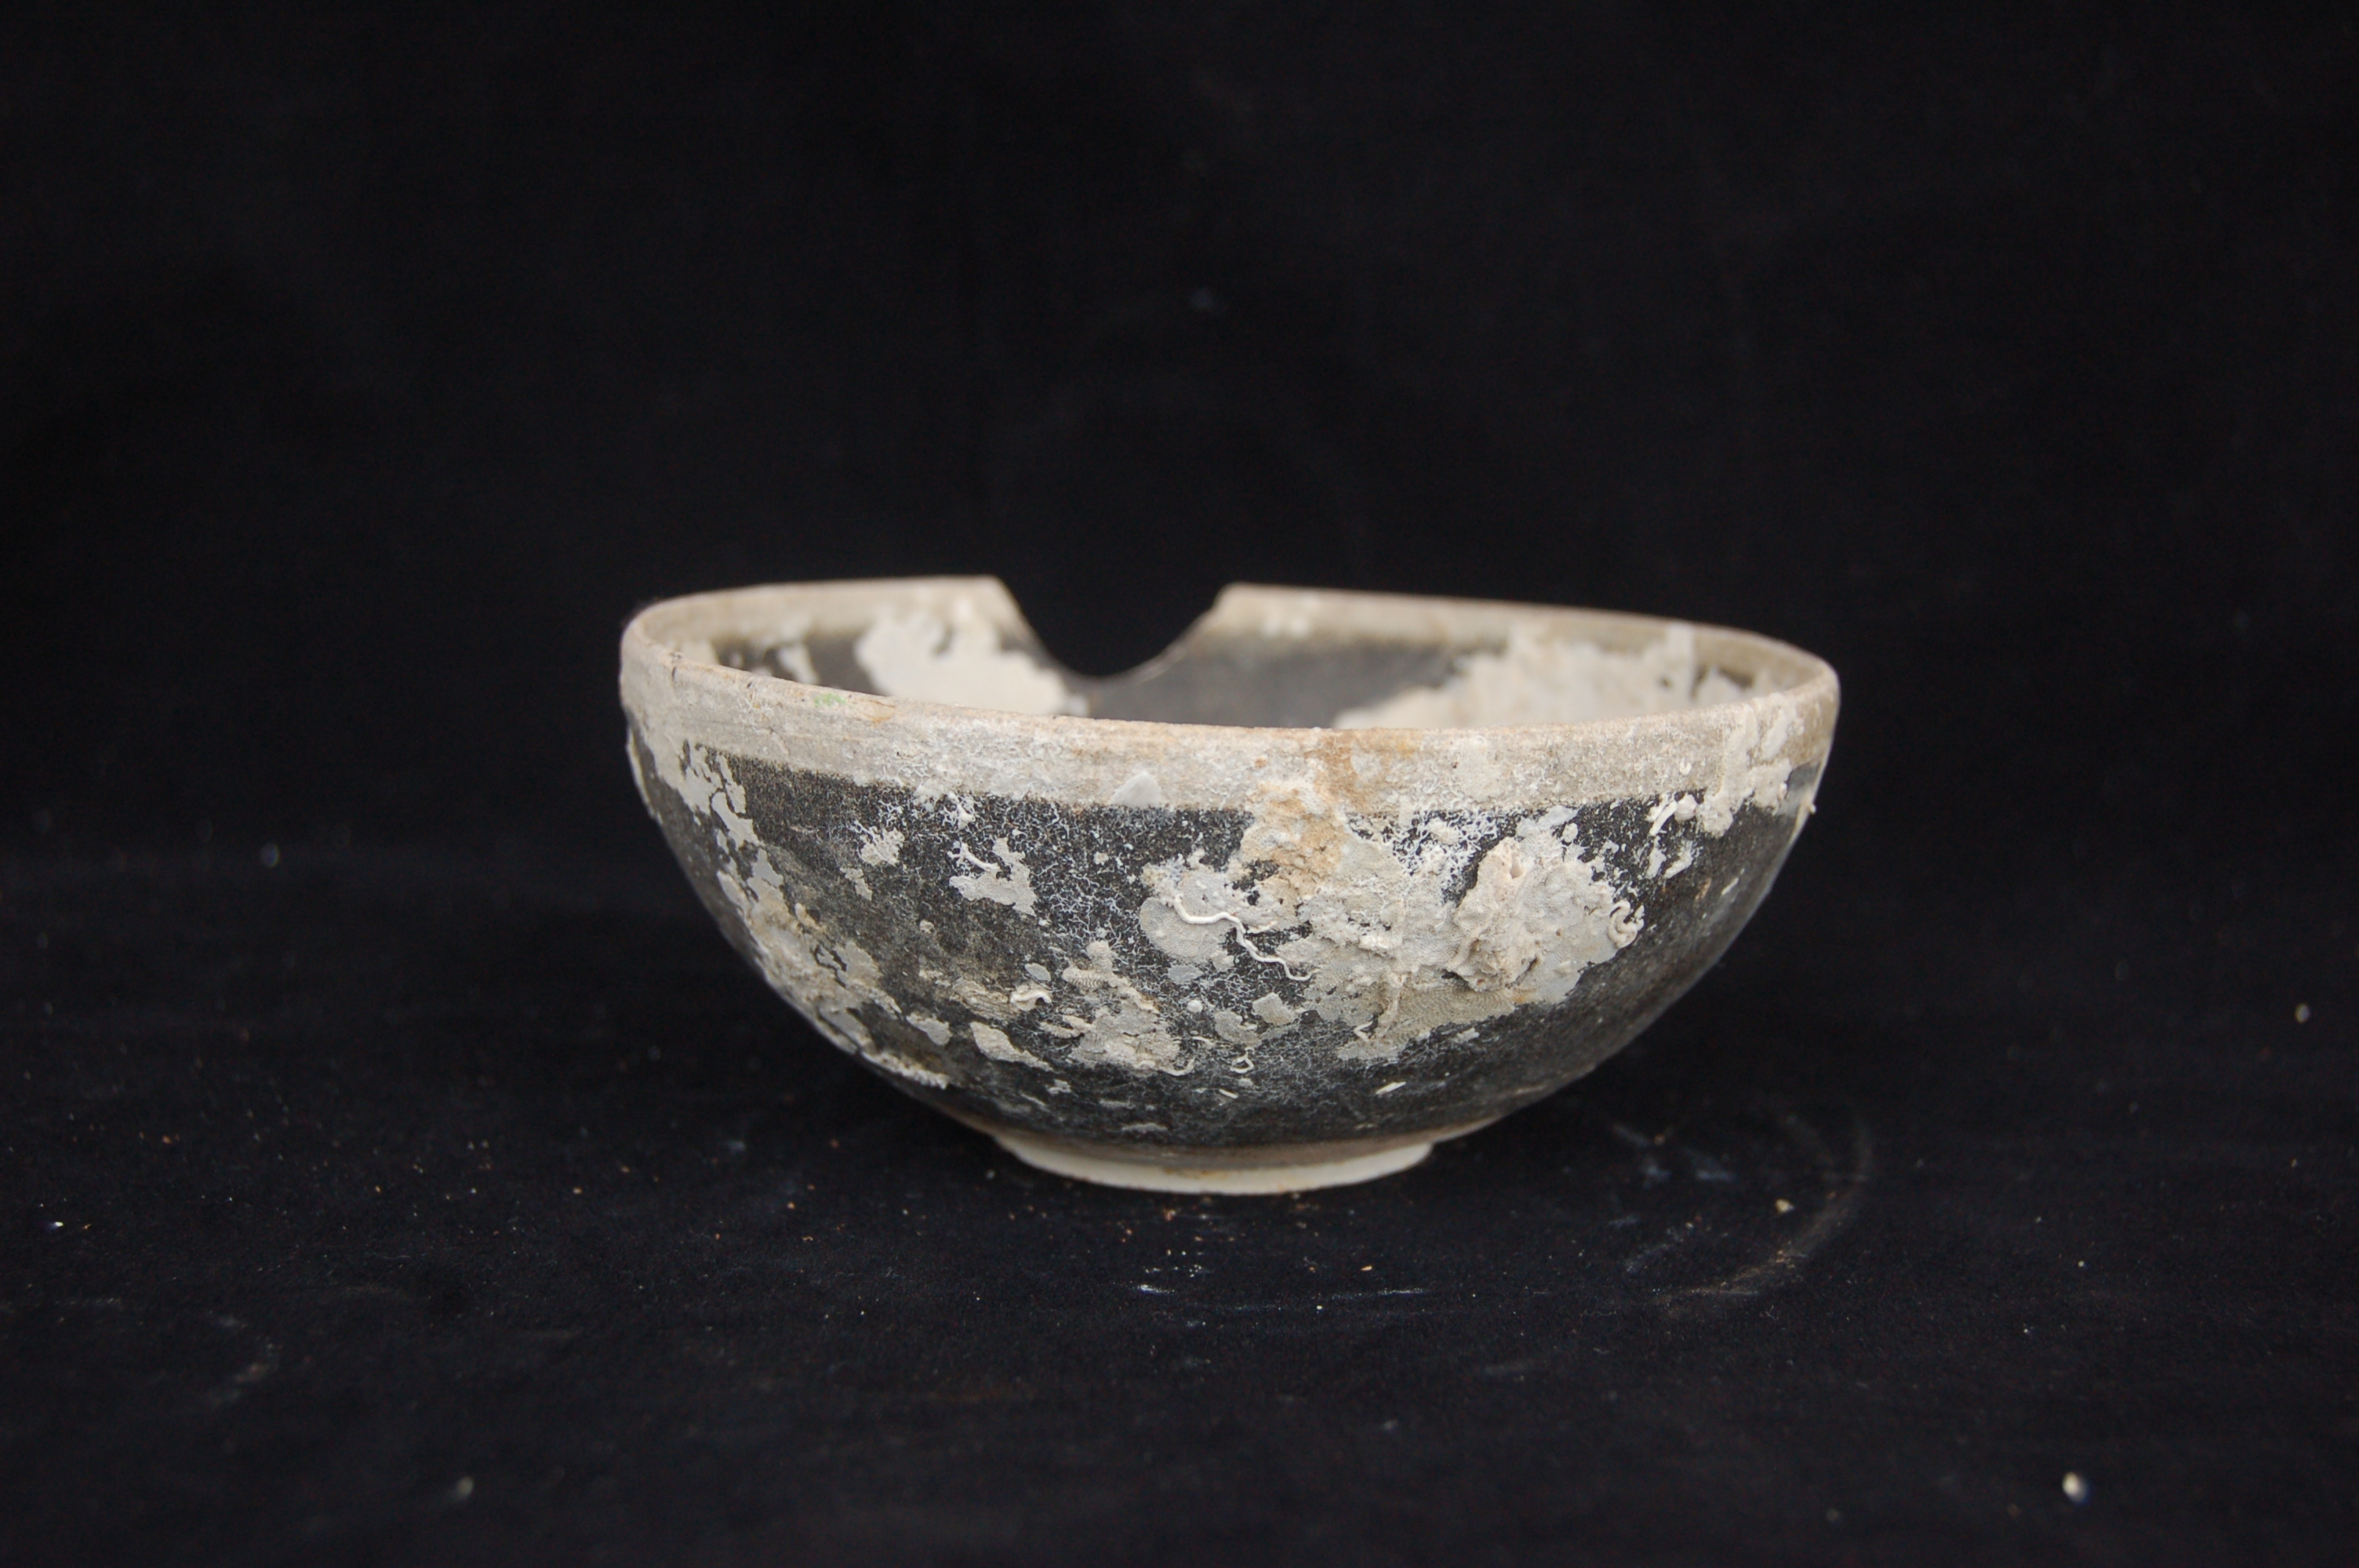 <em>Temmoku</em> with a straight rim, rounded wall and carved foot-ring. Unglazed rim. Diameter 13 cm, height 5.5 cm.